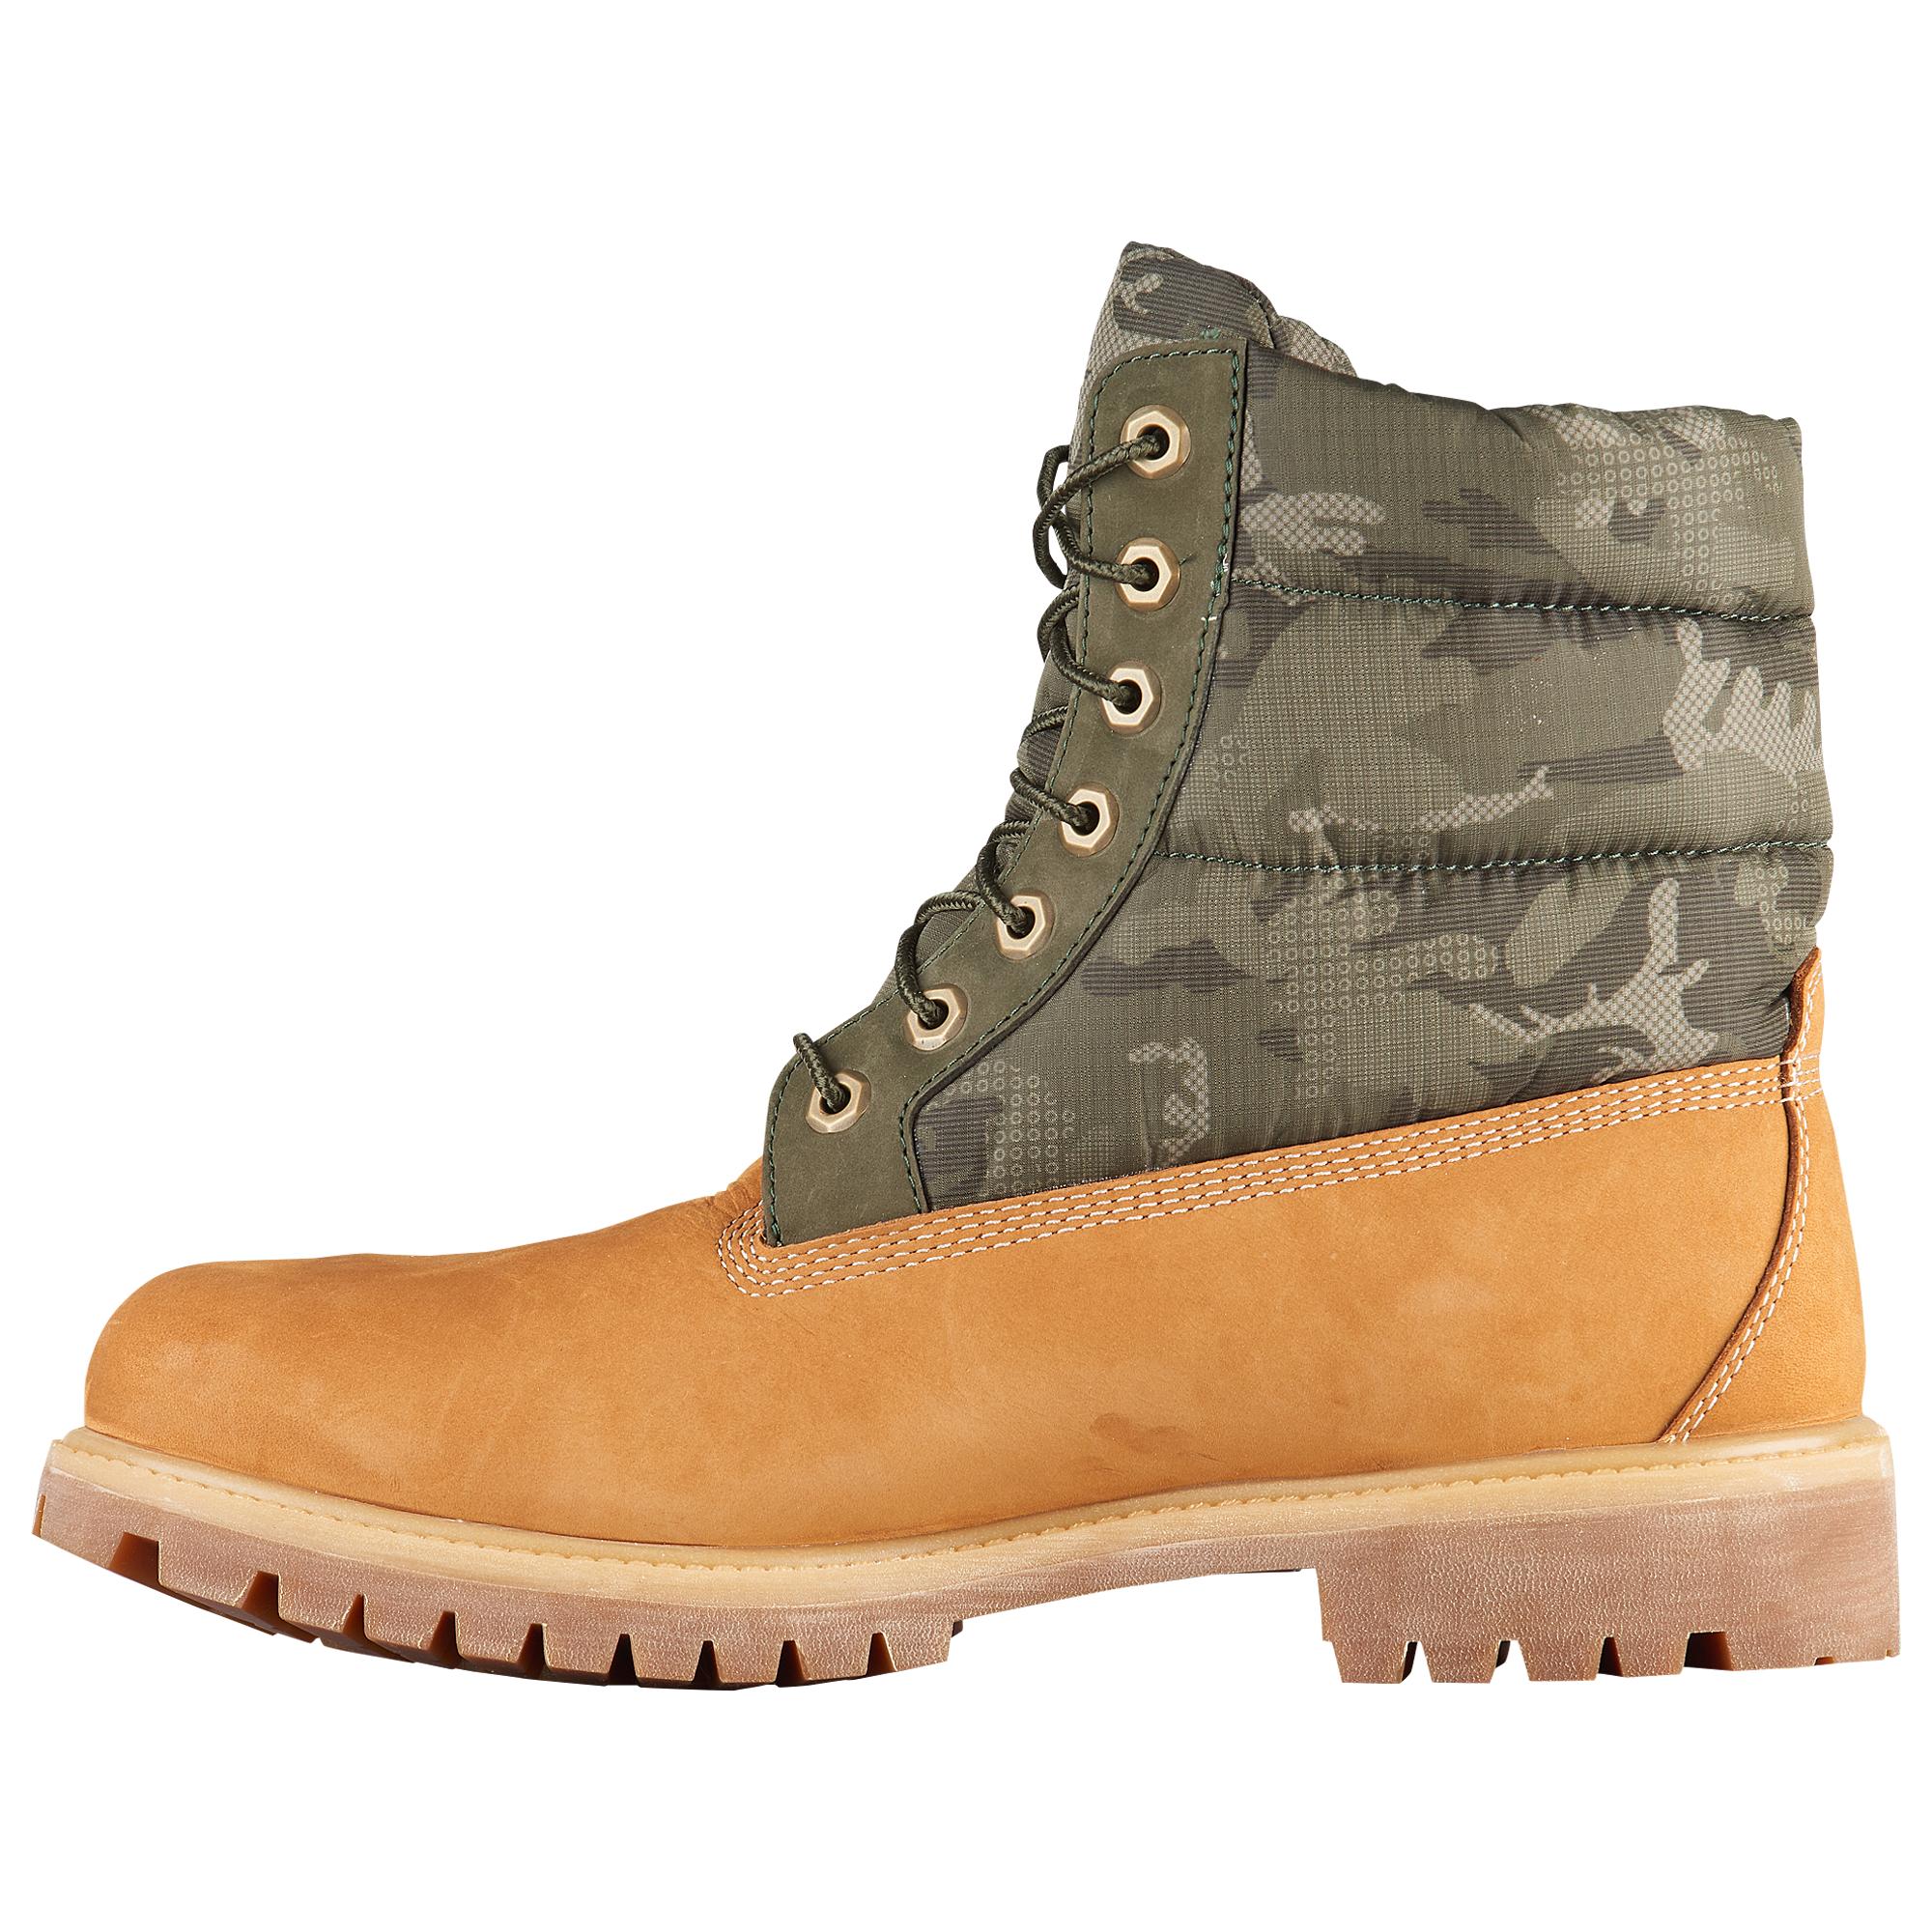 Timberland Rubber 6 Inch Classic Premium Camouflage Puffer Boots - Wheat  Camo - A1zrh for Men - Lyst